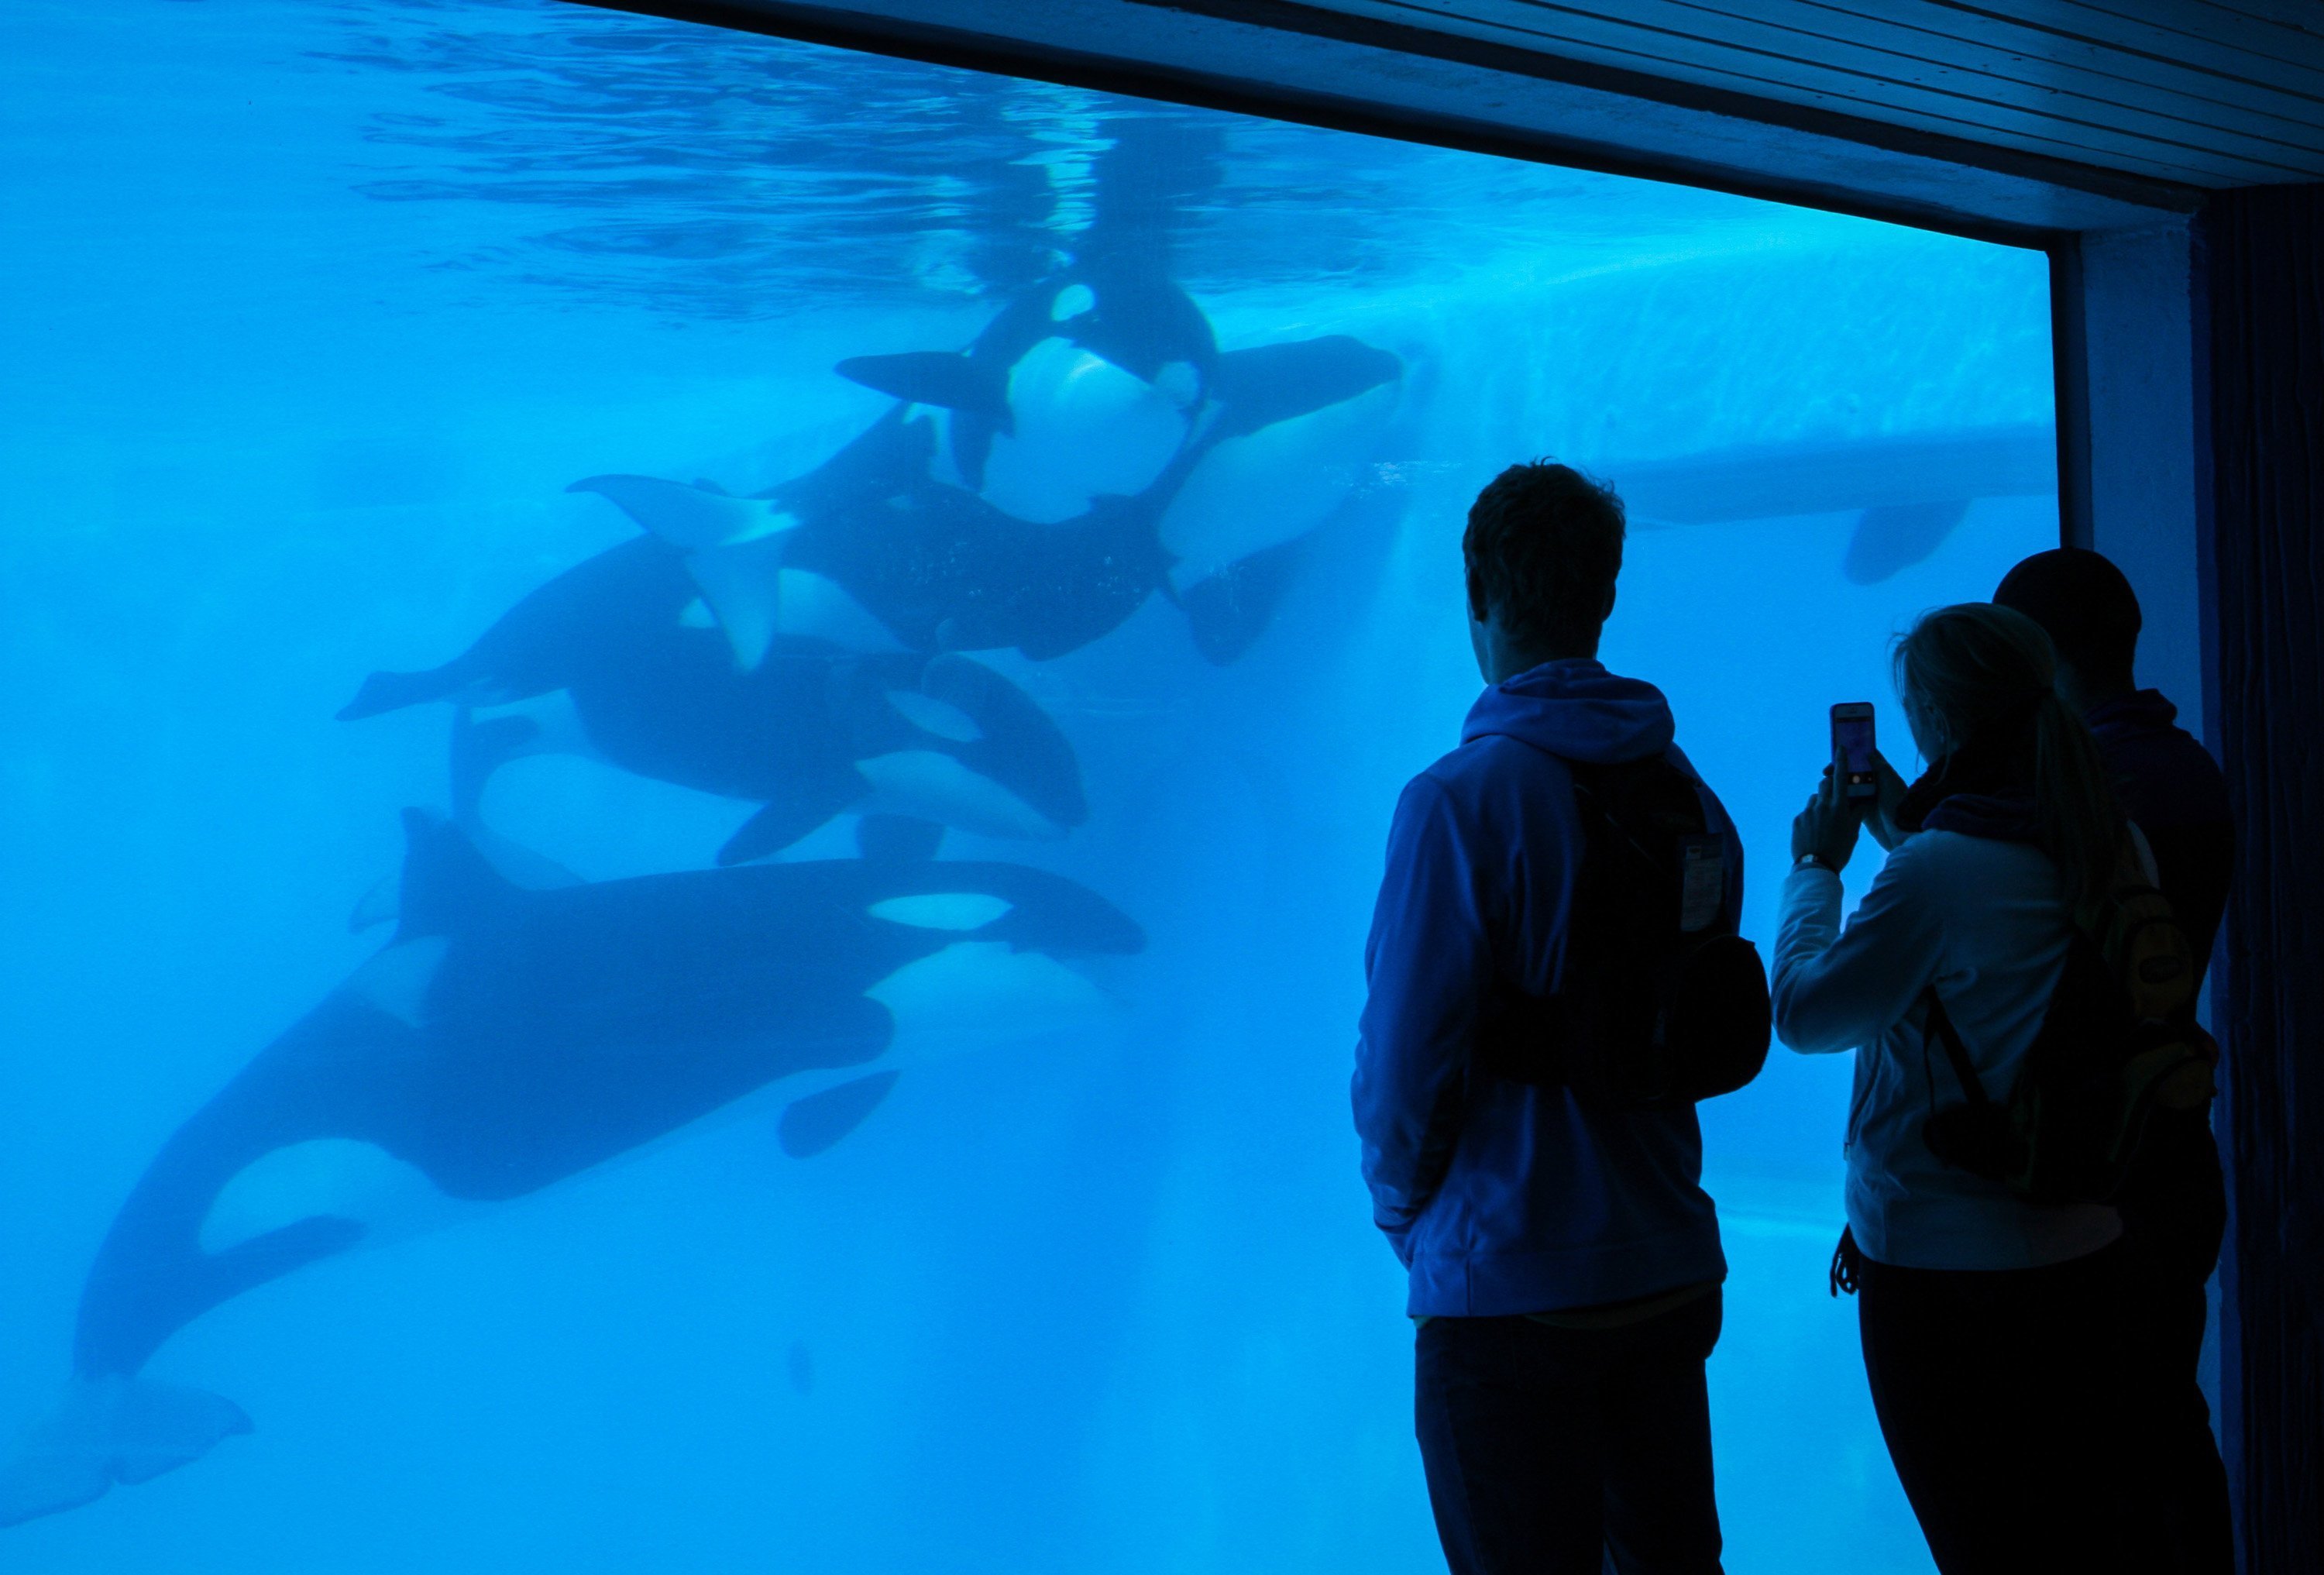 Patrons watch Orcas play at Sea World in Orlando, FL on Jan. 7, 2014. (Orlando Sentinel—Getty Images)